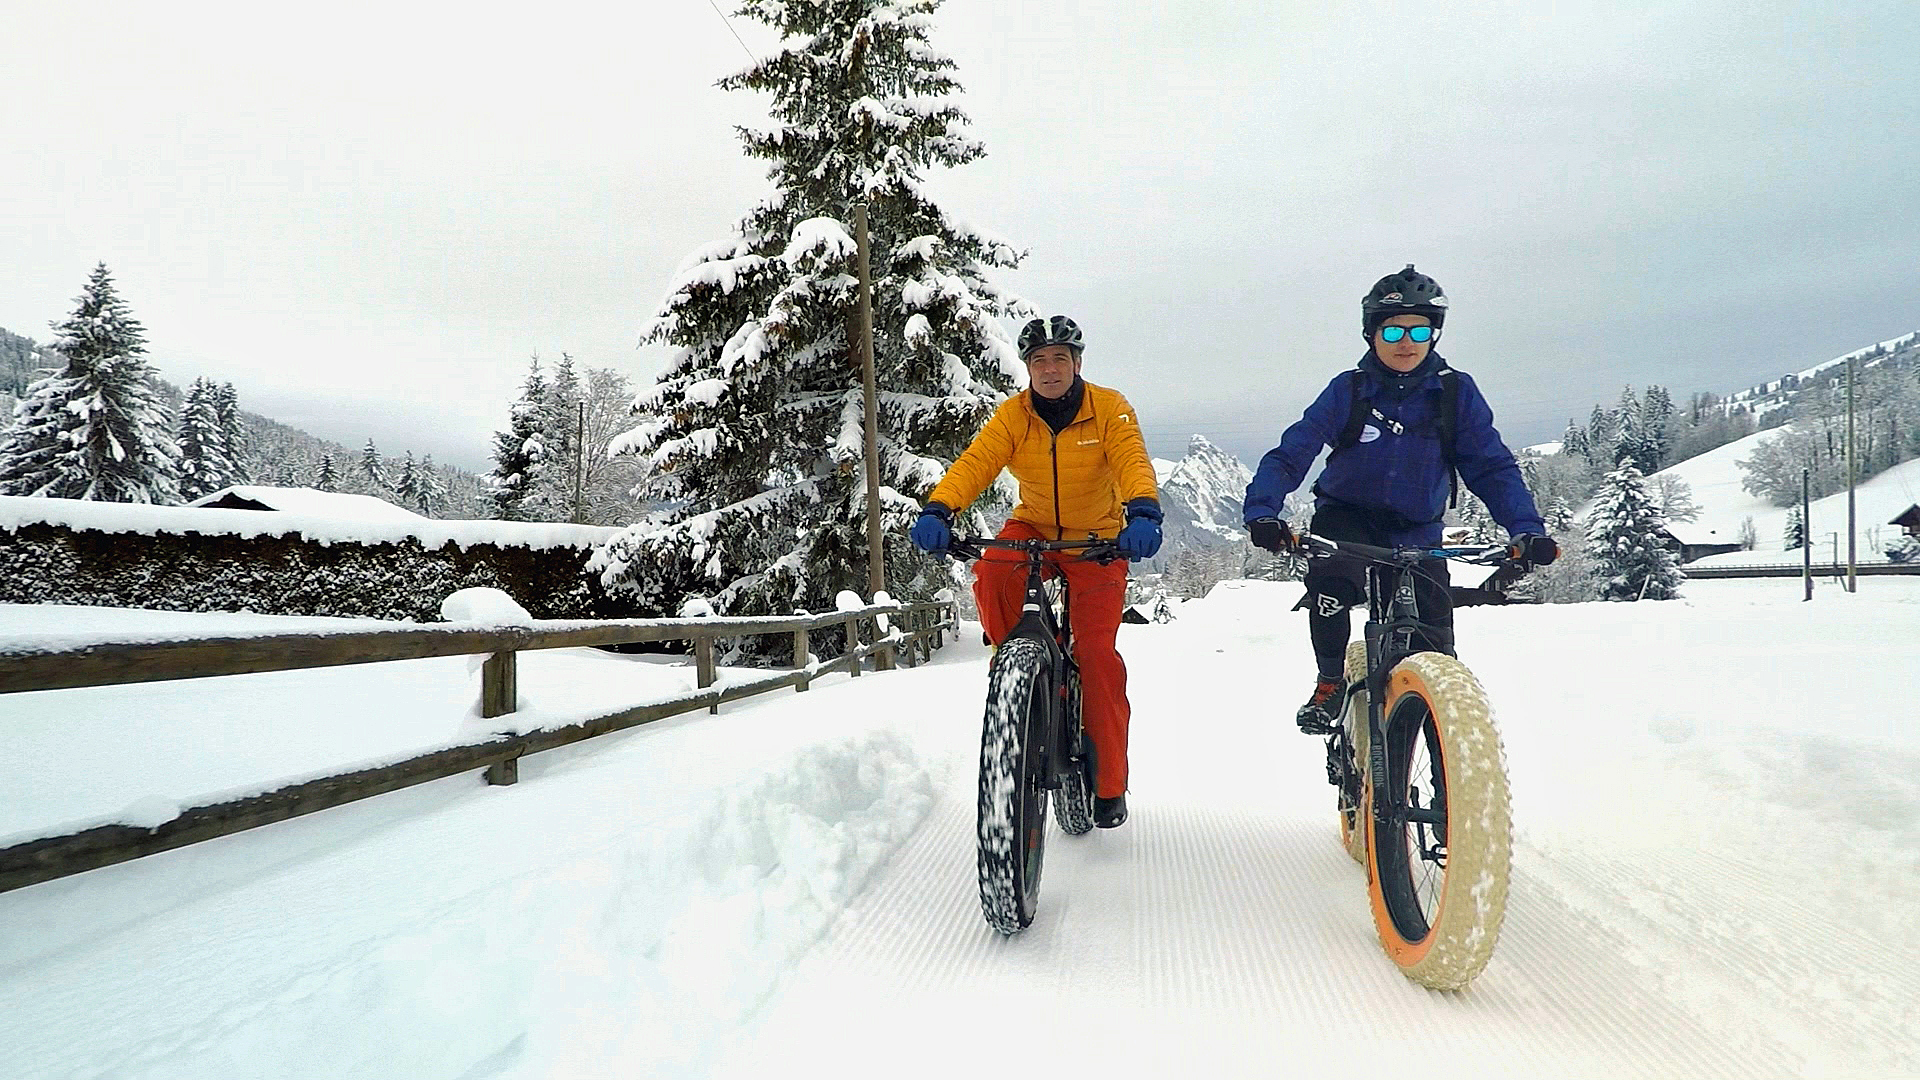 Jeff and fat bike instructor